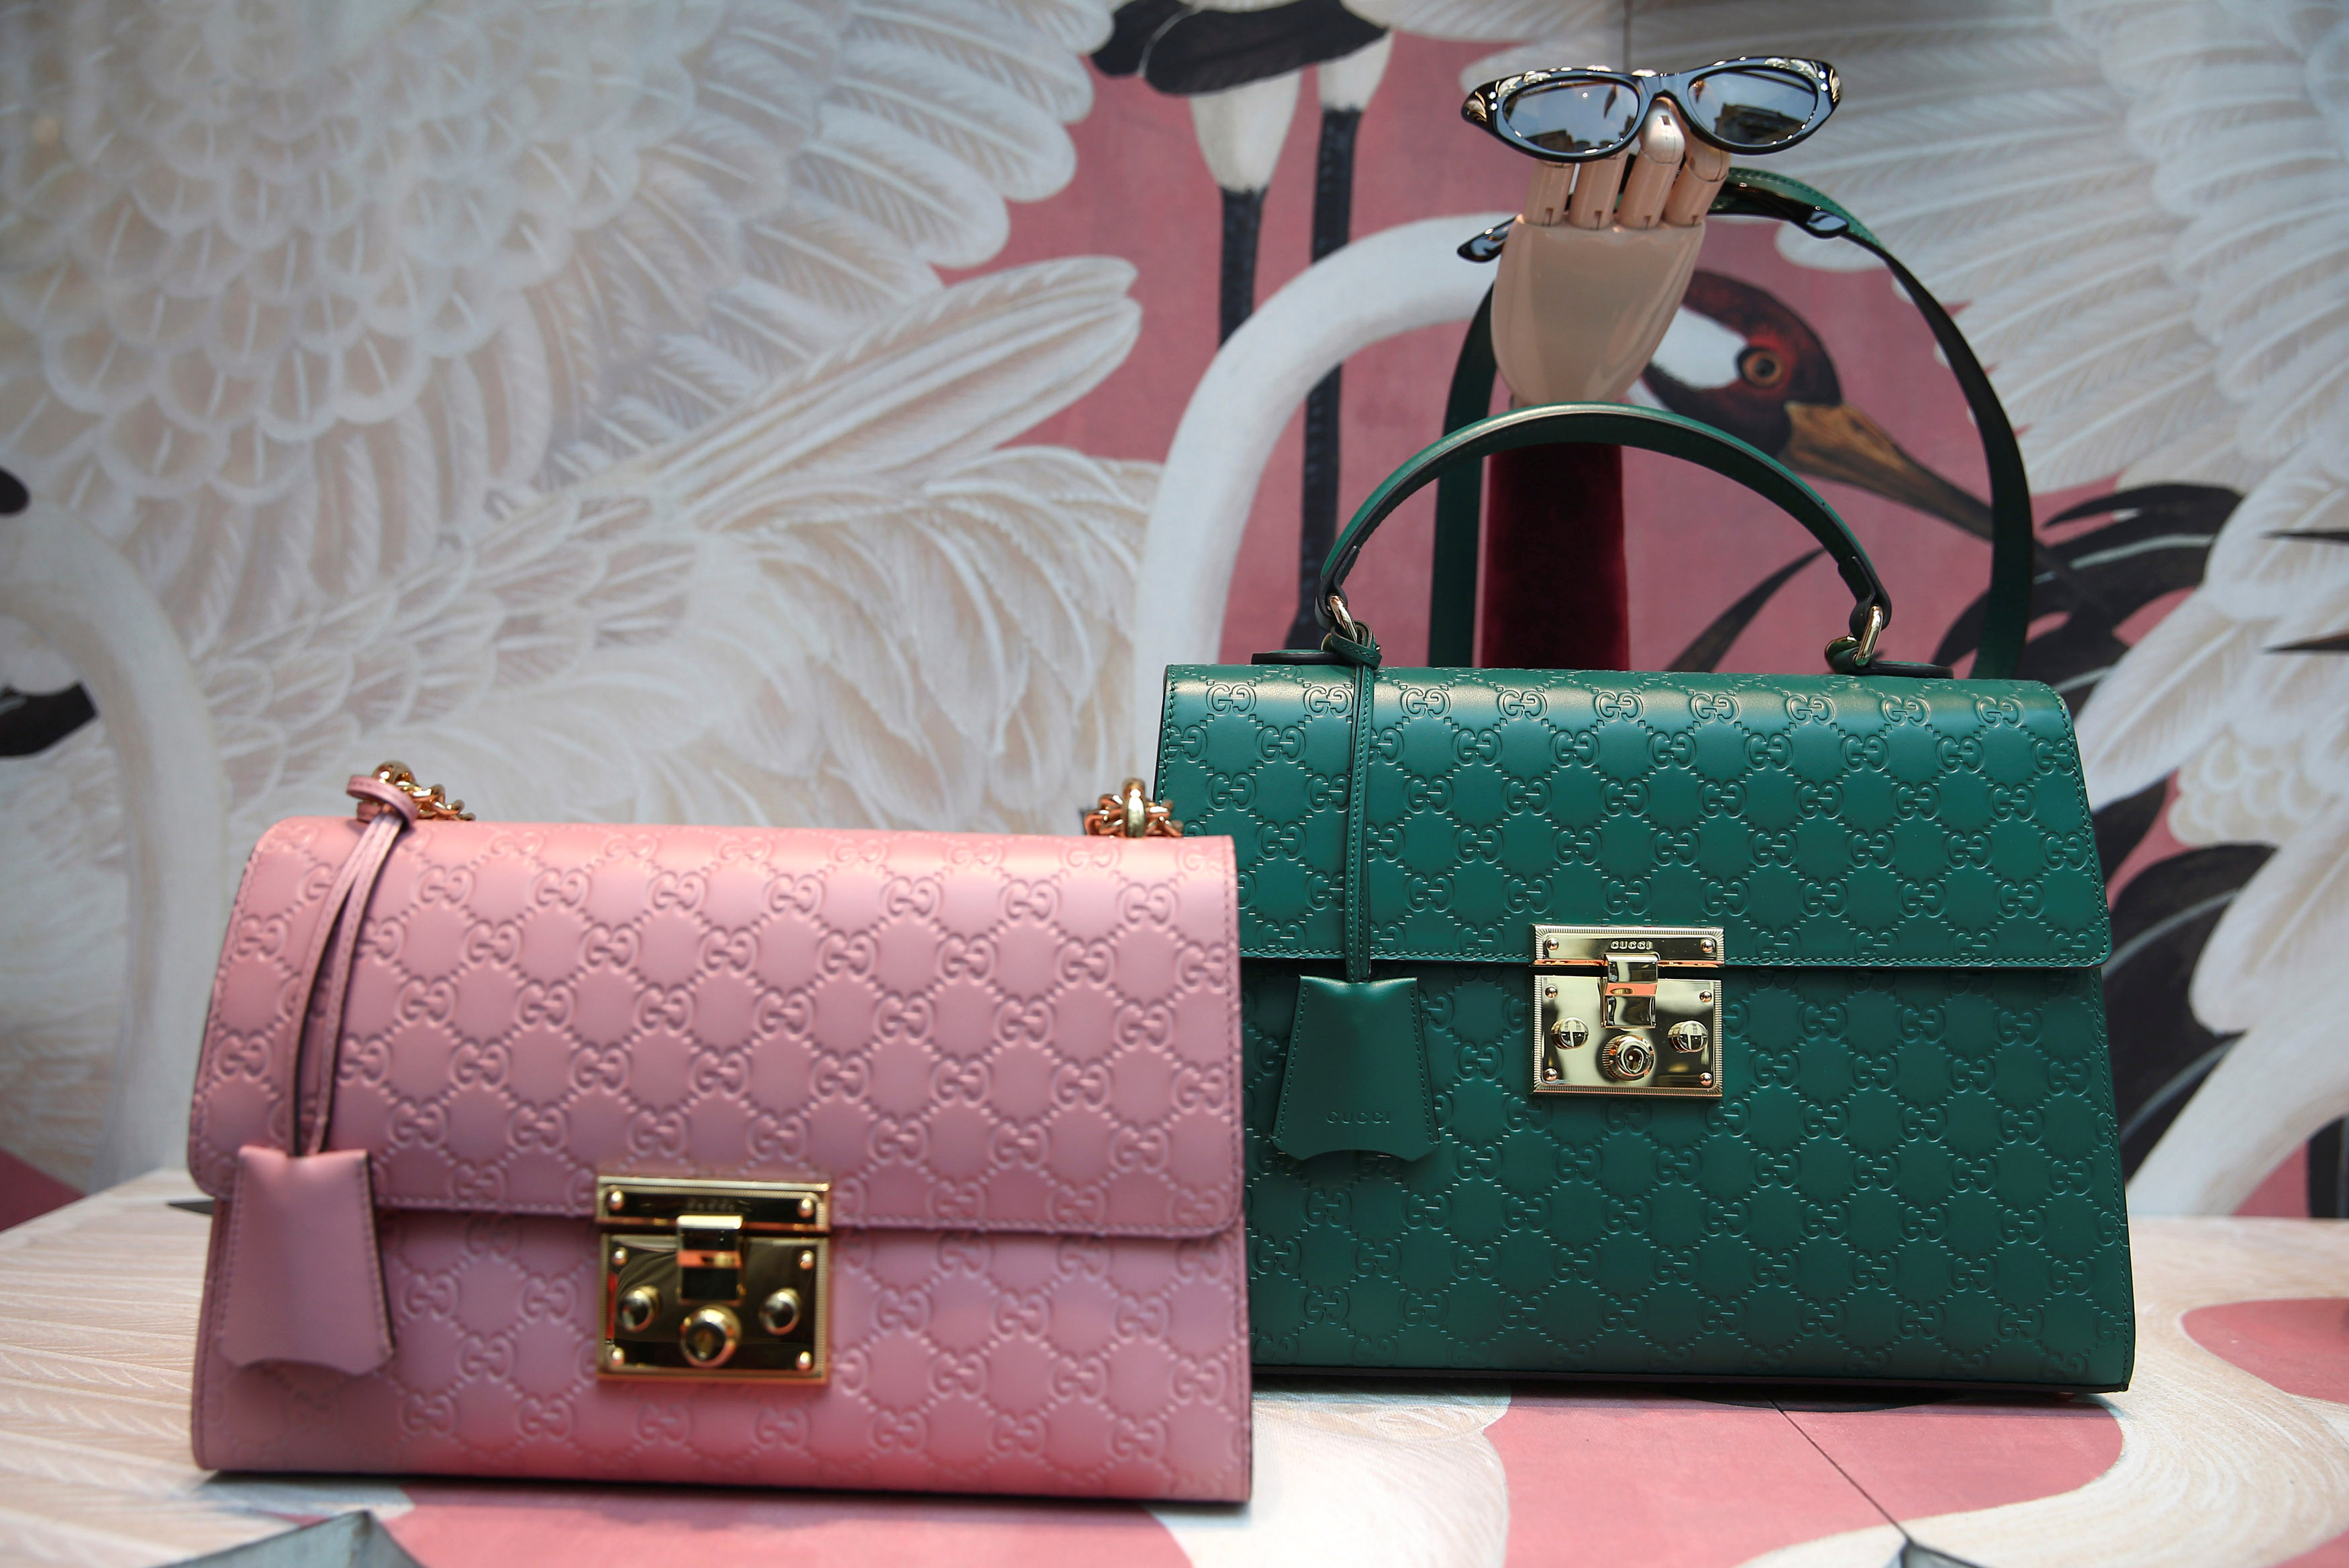 New Data Suggests That Gucci Has Been Subtly Raising the Prices of